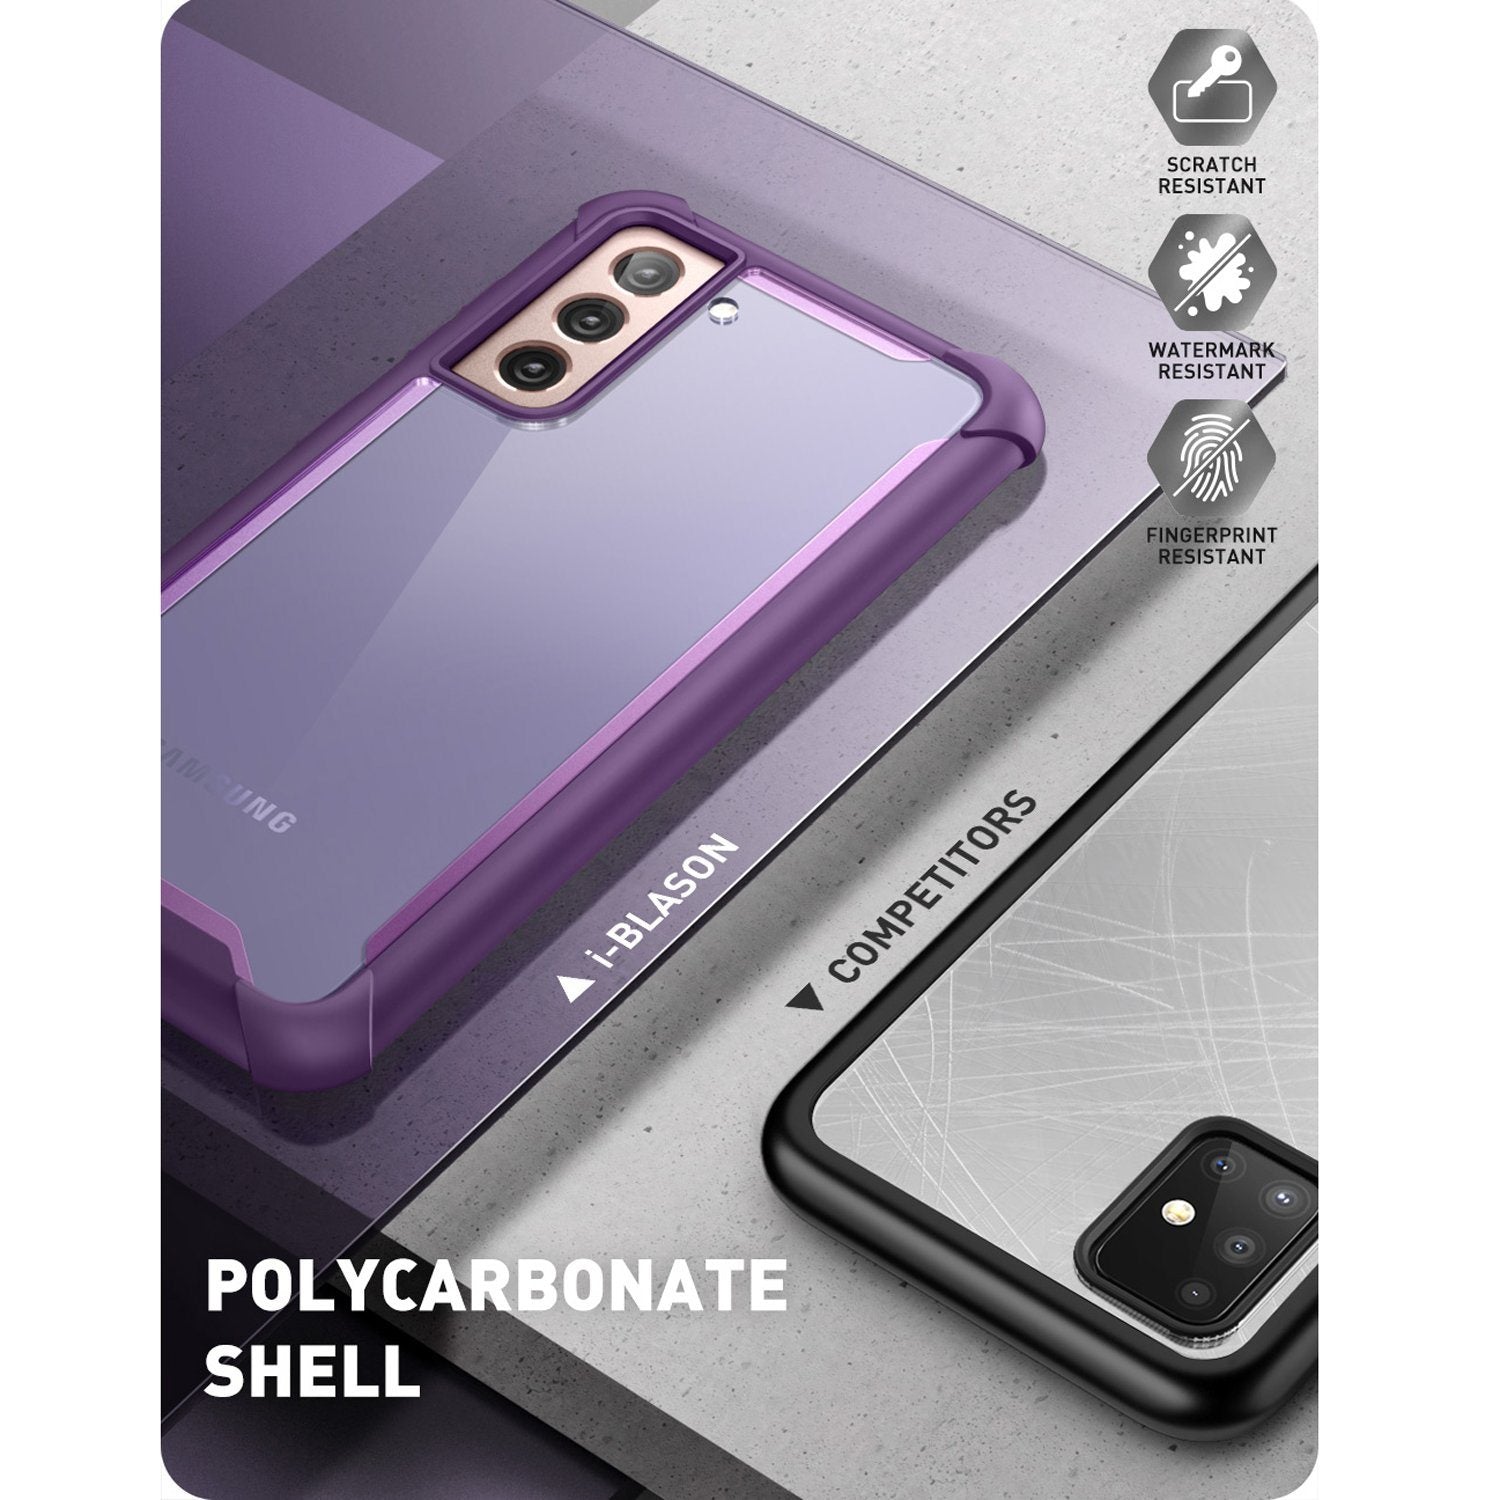 i-Blason Ares Series Clear Case for Samsung Galaxy S21(Without Screen Protector), Purple S21 i-Blason 